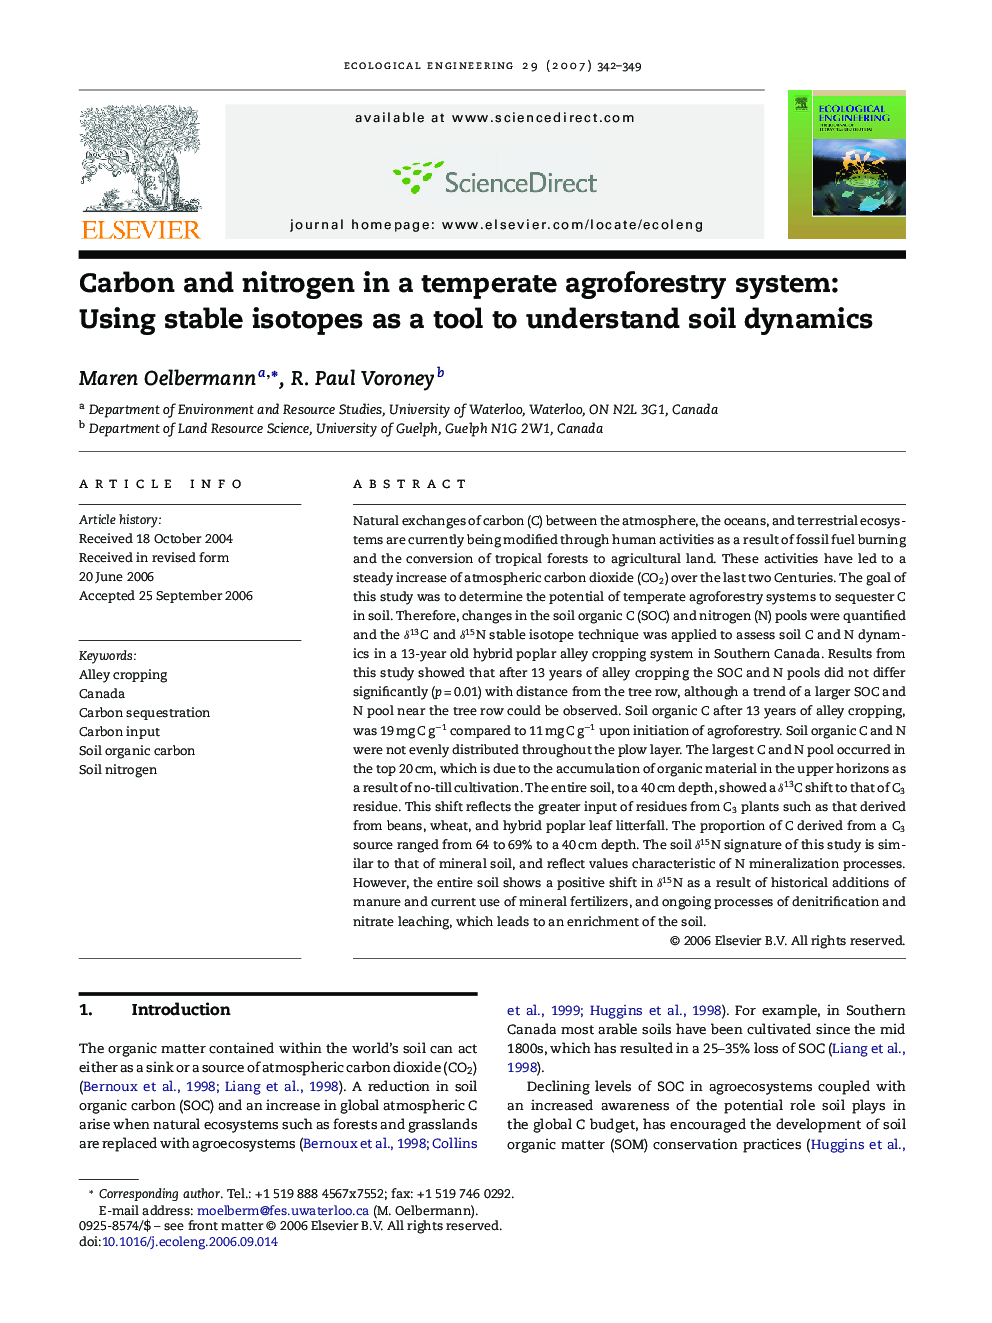 Carbon and nitrogen in a temperate agroforestry system: Using stable isotopes as a tool to understand soil dynamics